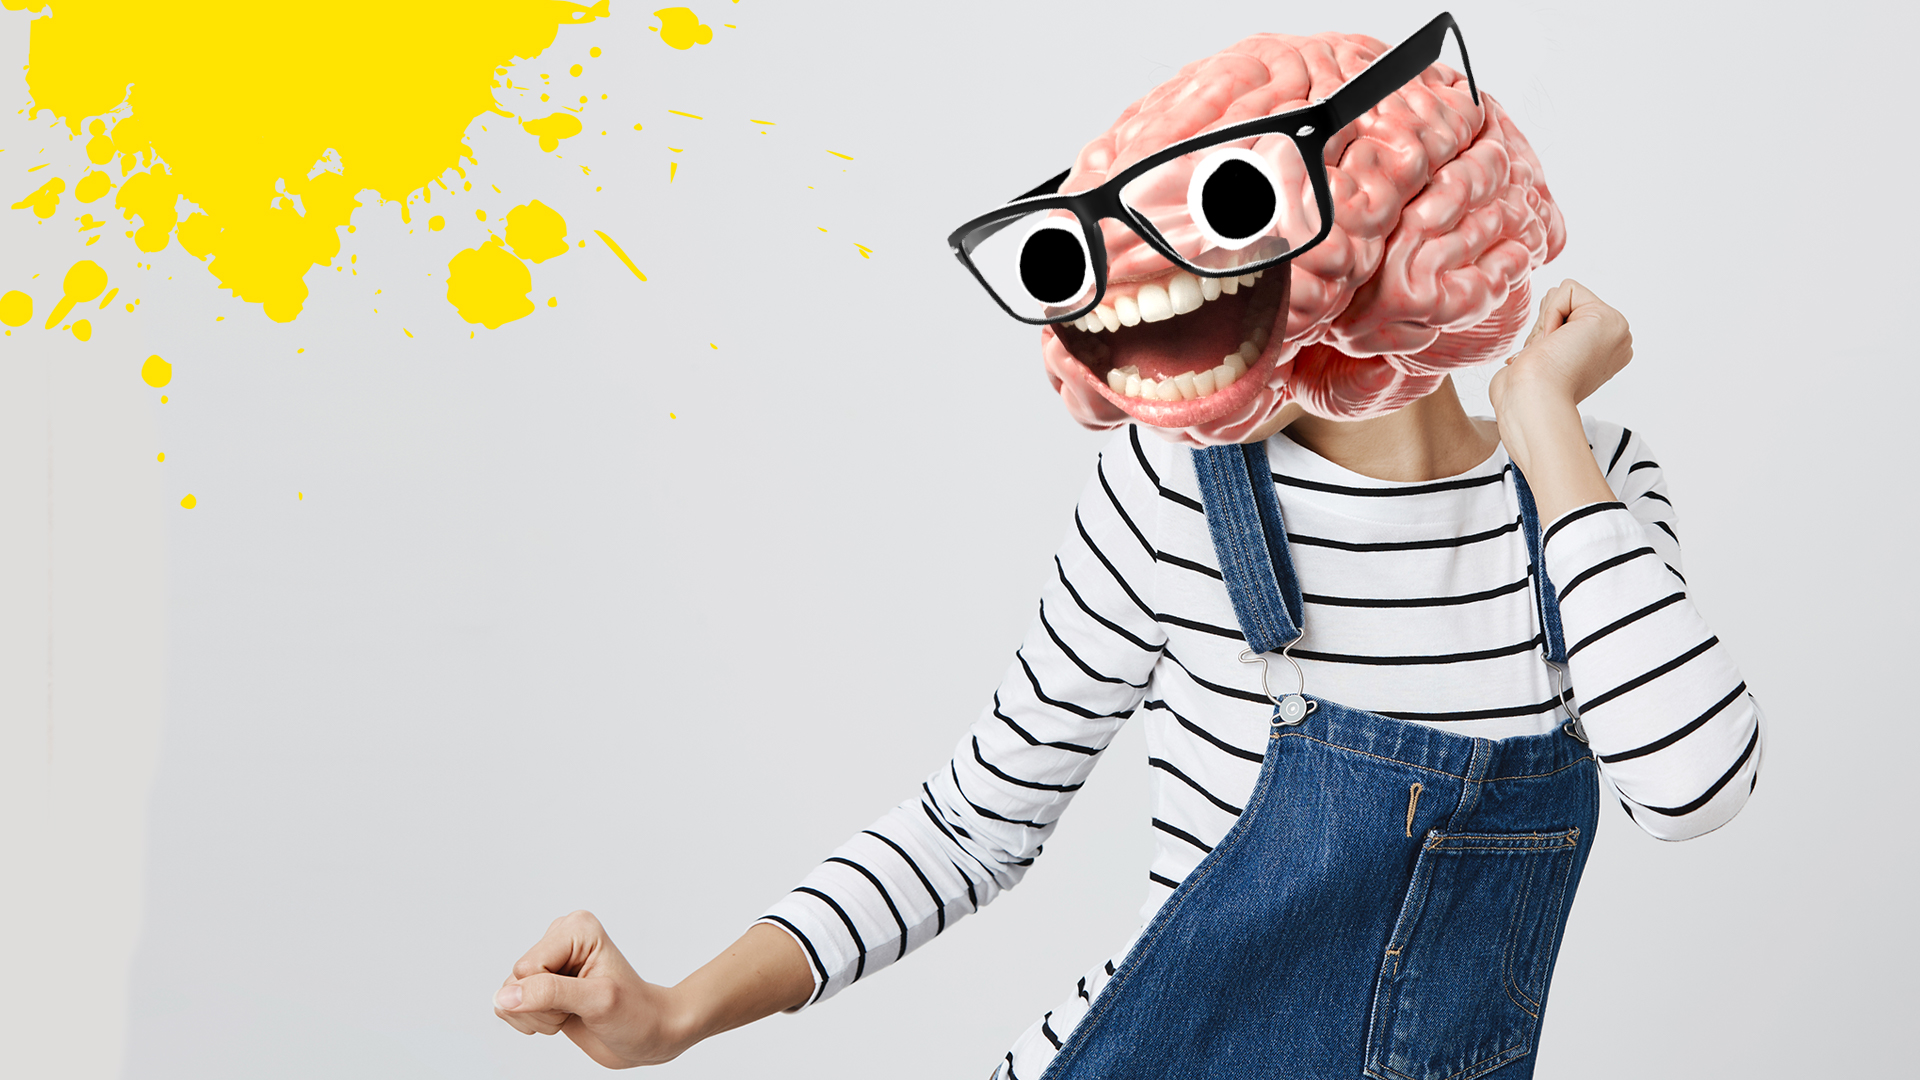 A brain in dungarees dancing around